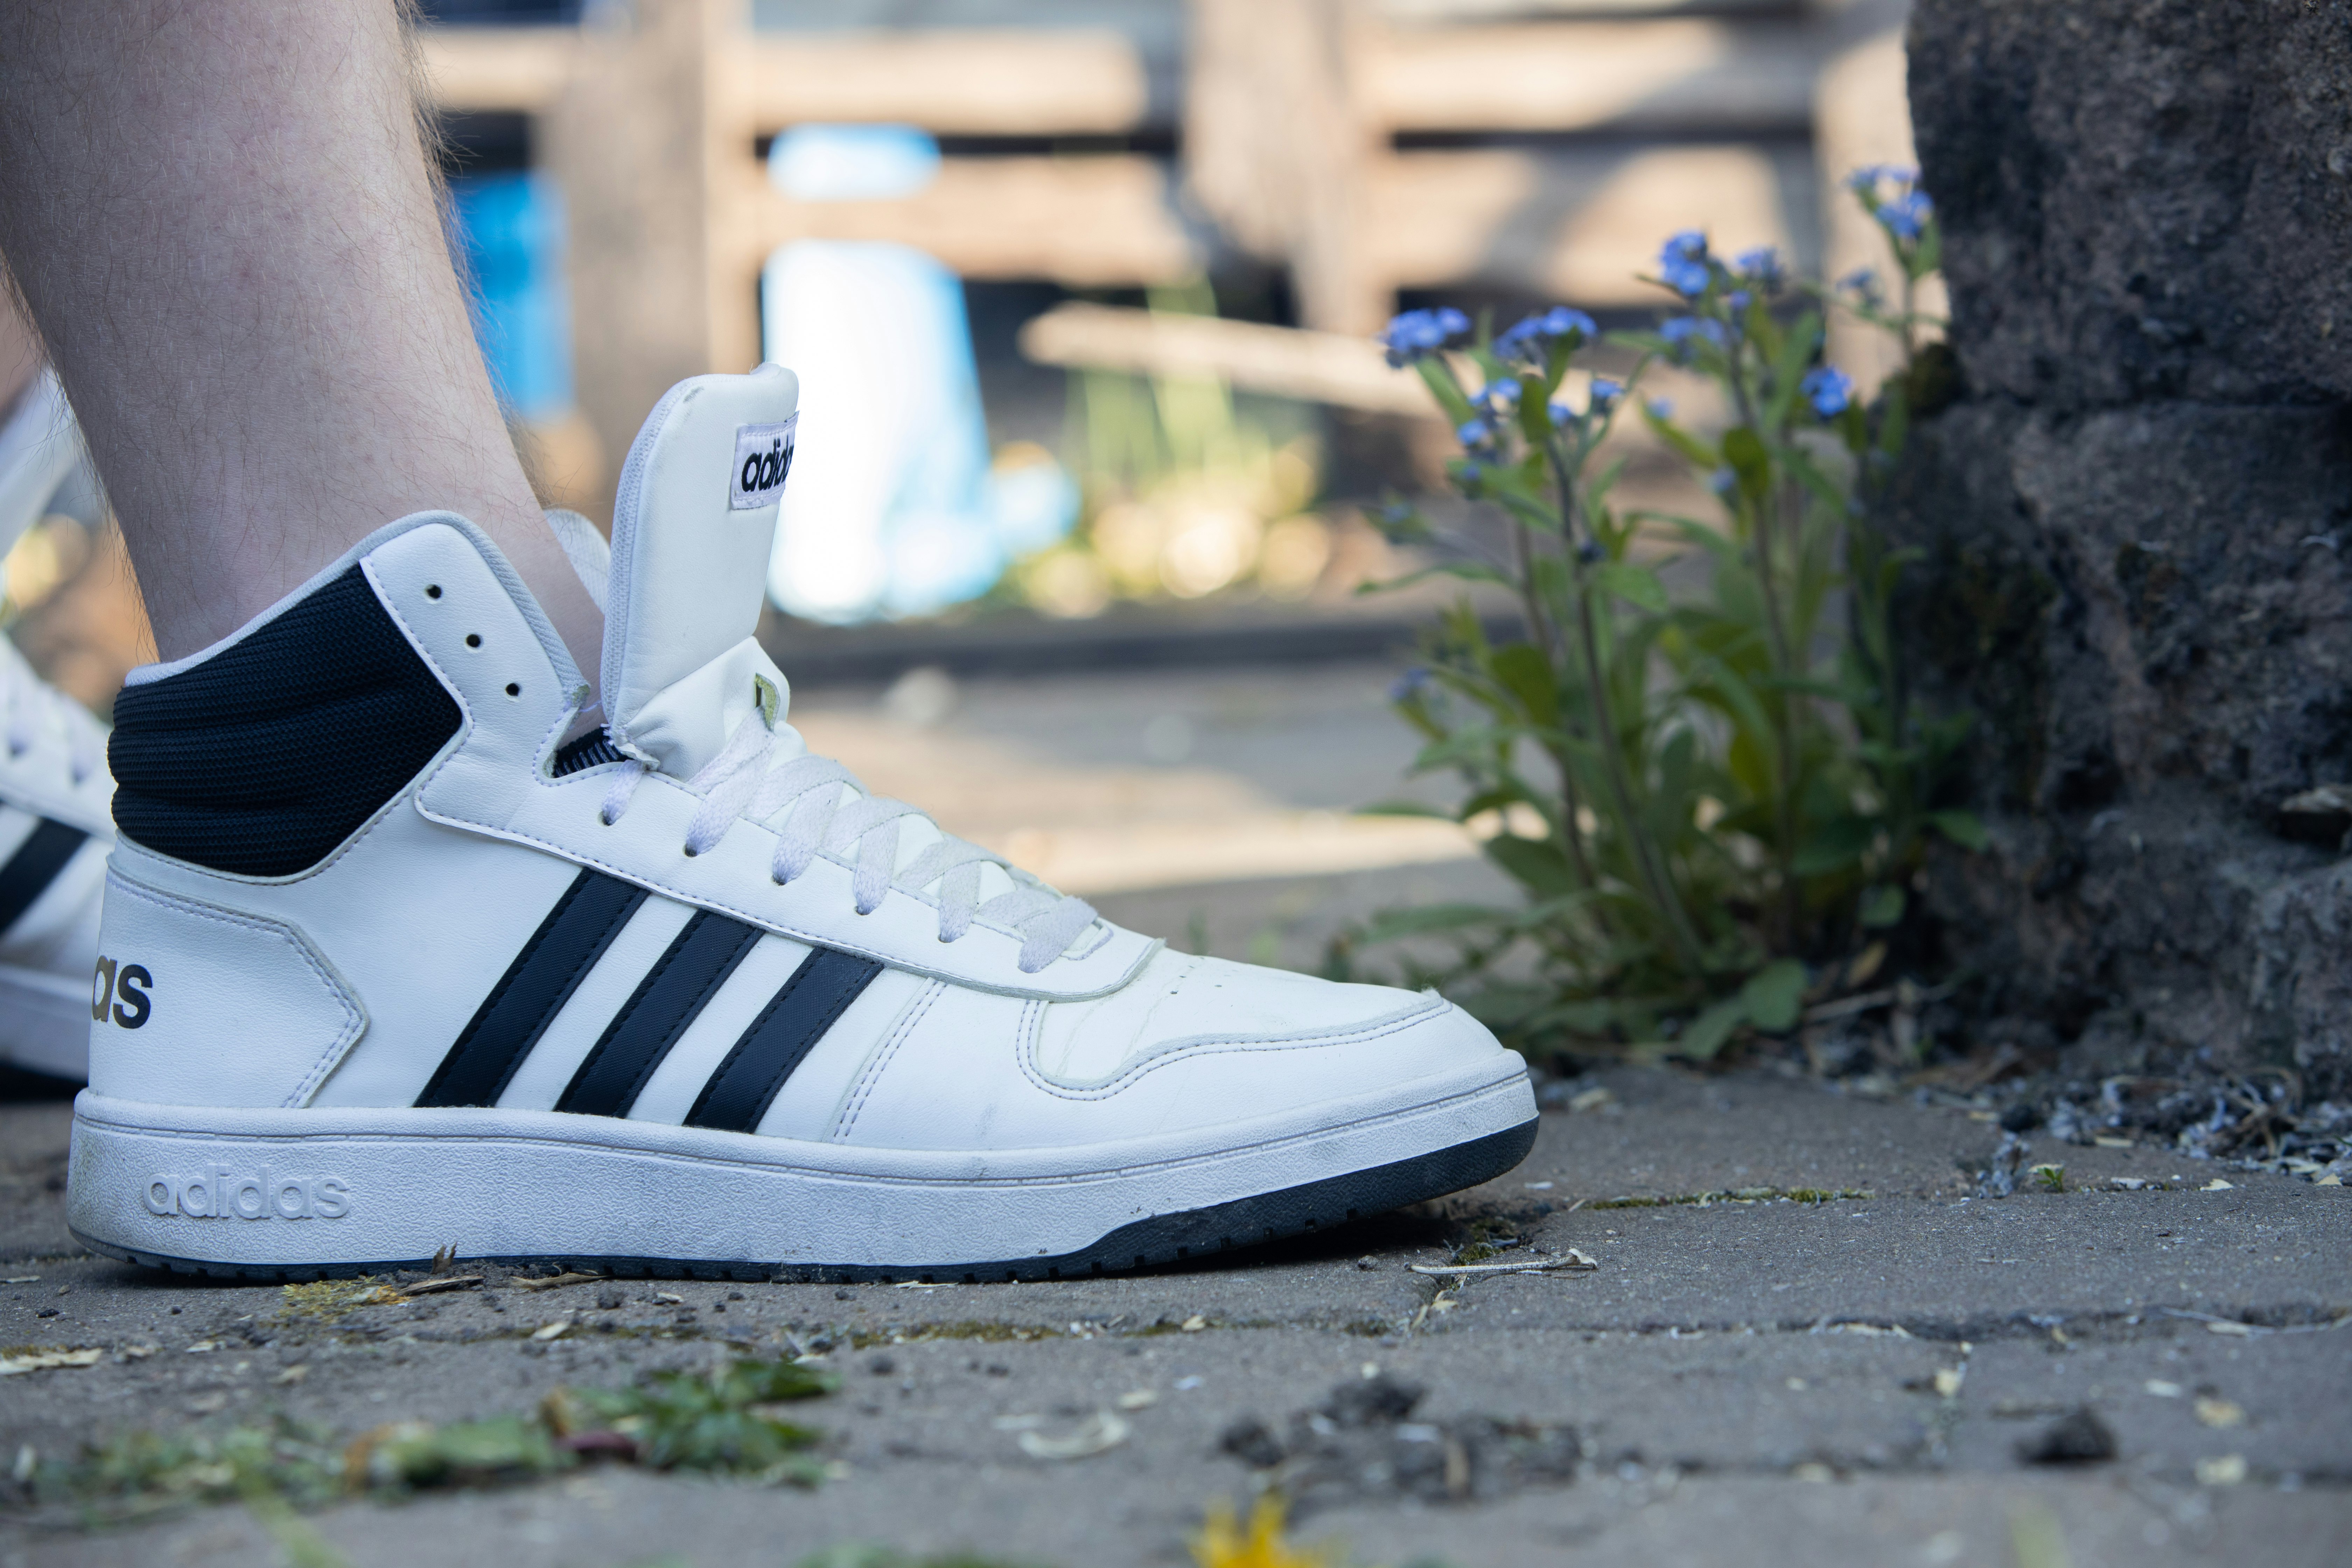 white and black adidas high top sneakers